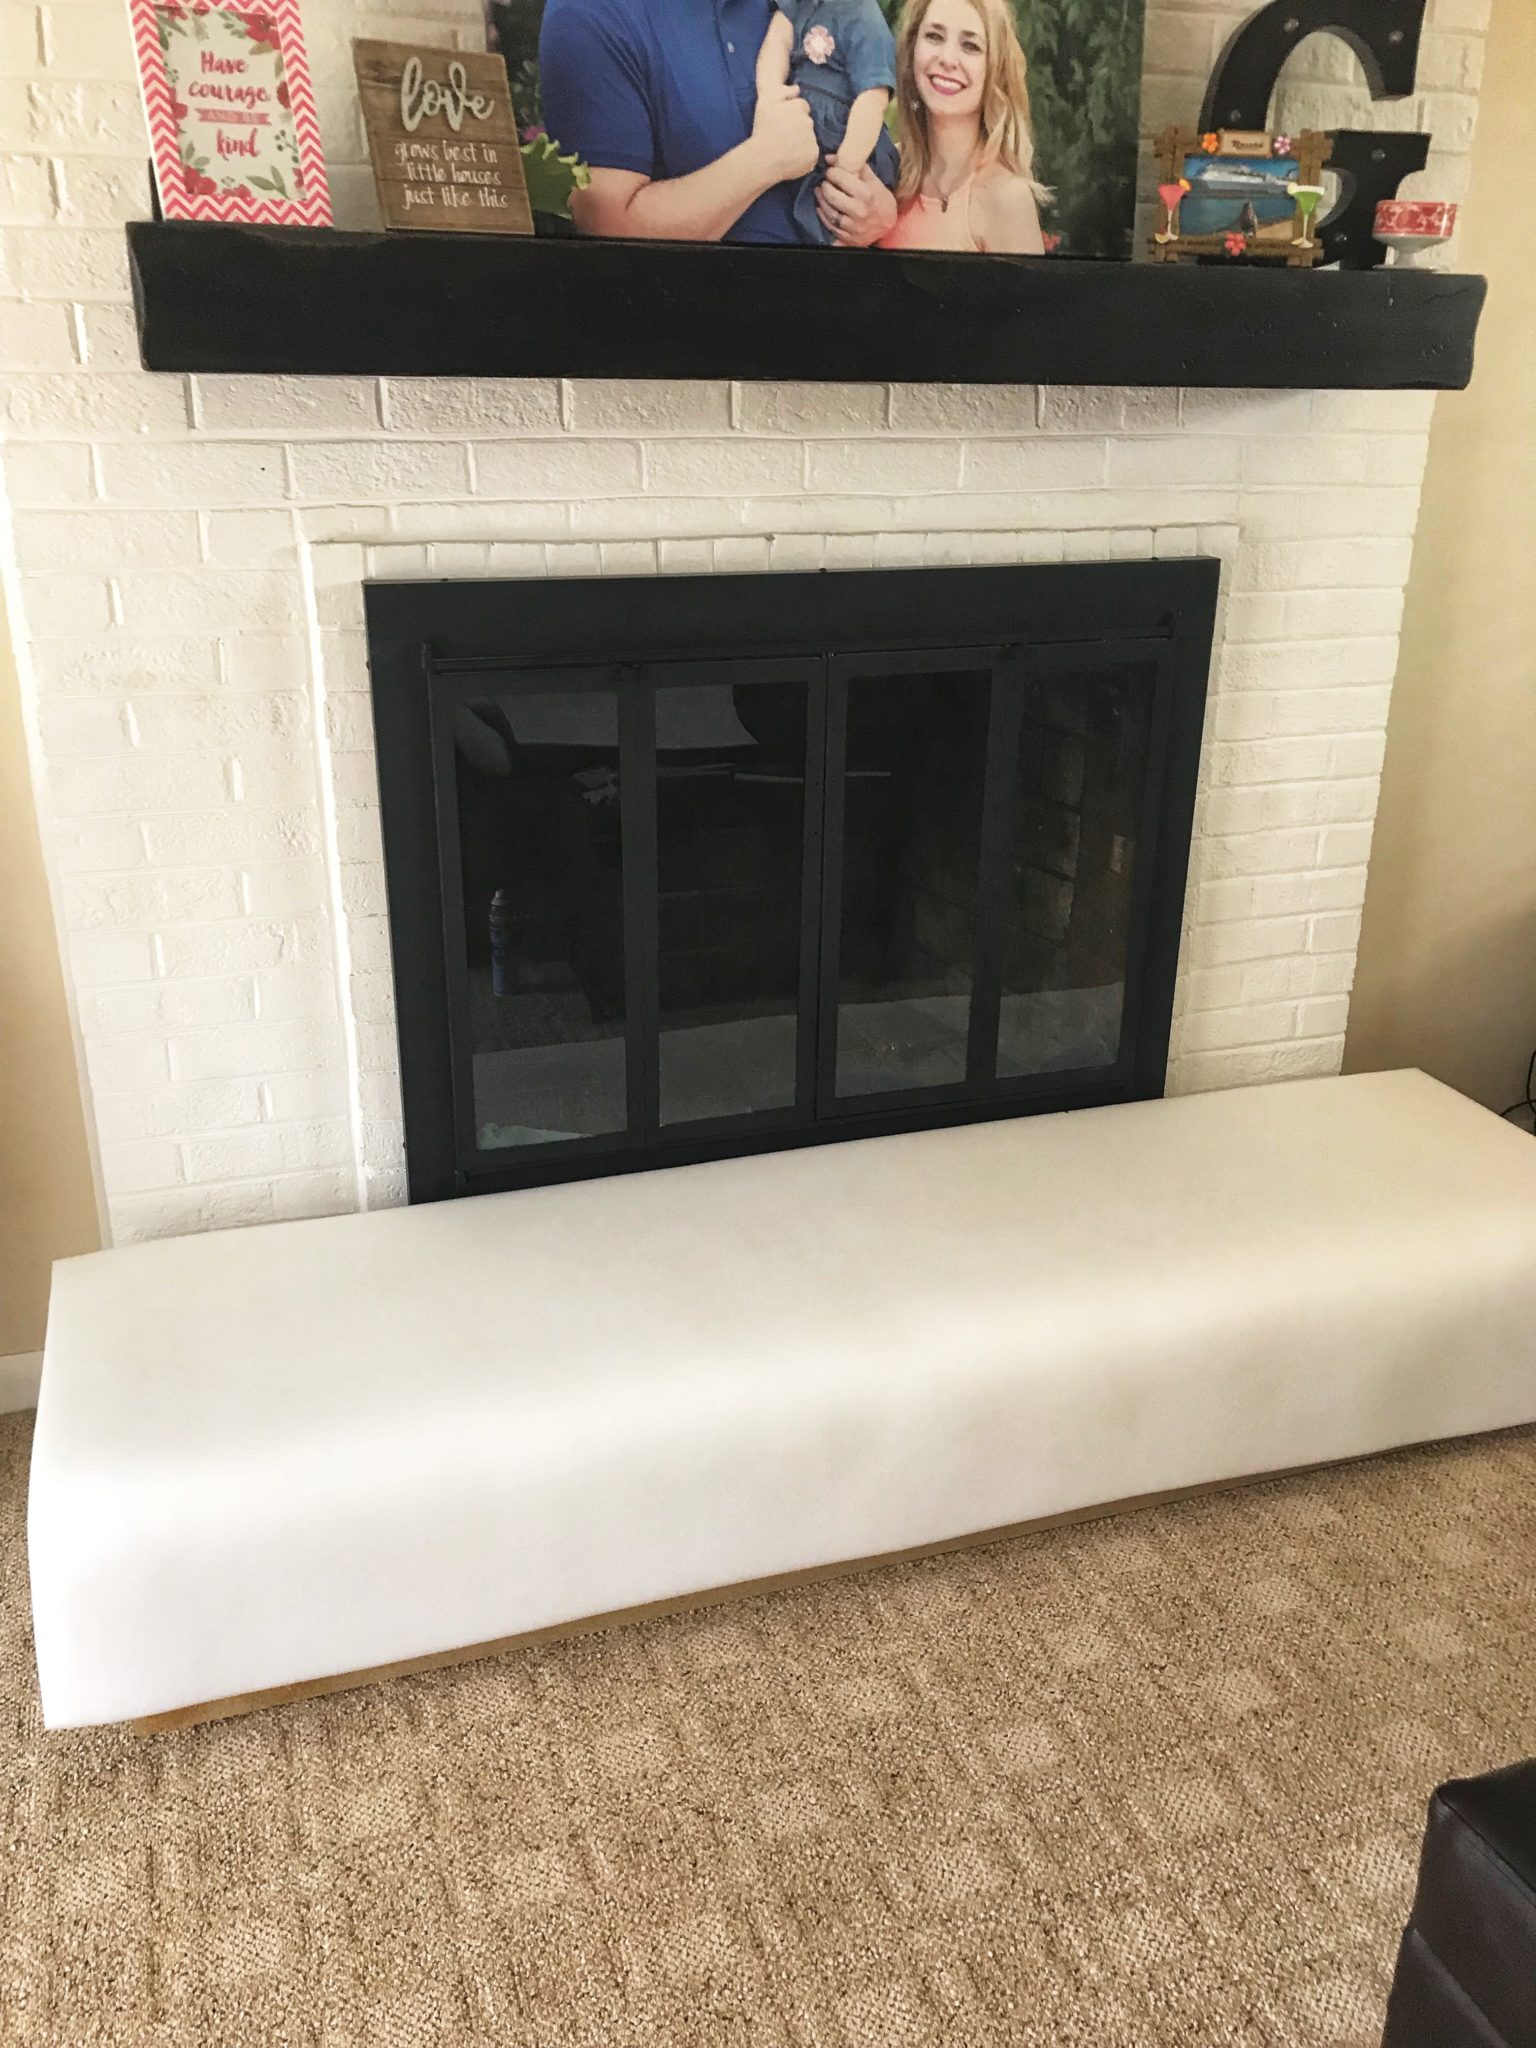 Beautiful Life Made Easy: Baby proof your fireplace or tables for under $4!